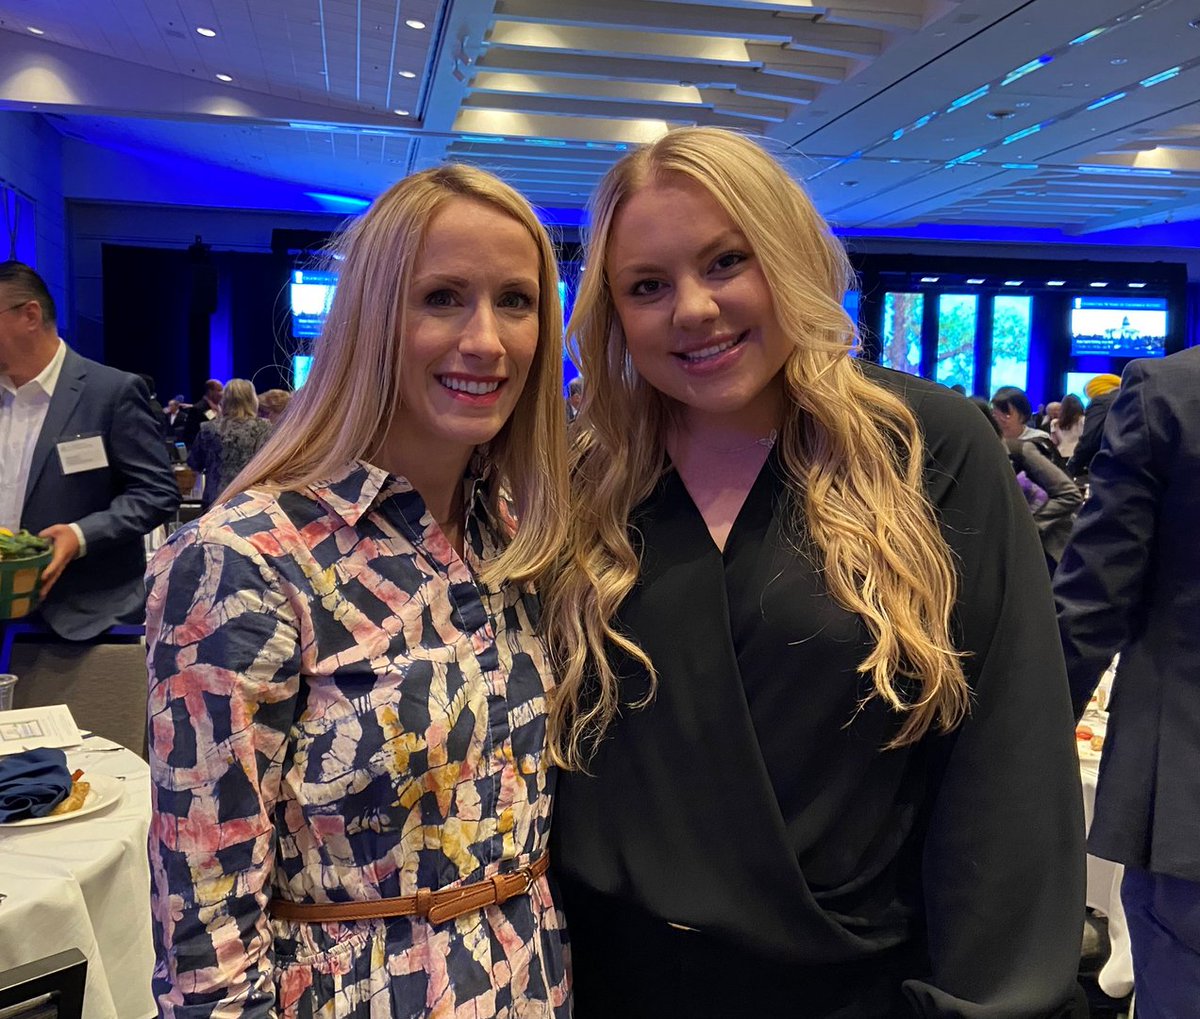 #TeamRandle was on hand to salute @CalChamberJen's leadership during the annual @CalChamber Host Breakfast this morning. The event marked a wonderful celebration of the job-creating businesses driving California’s future!